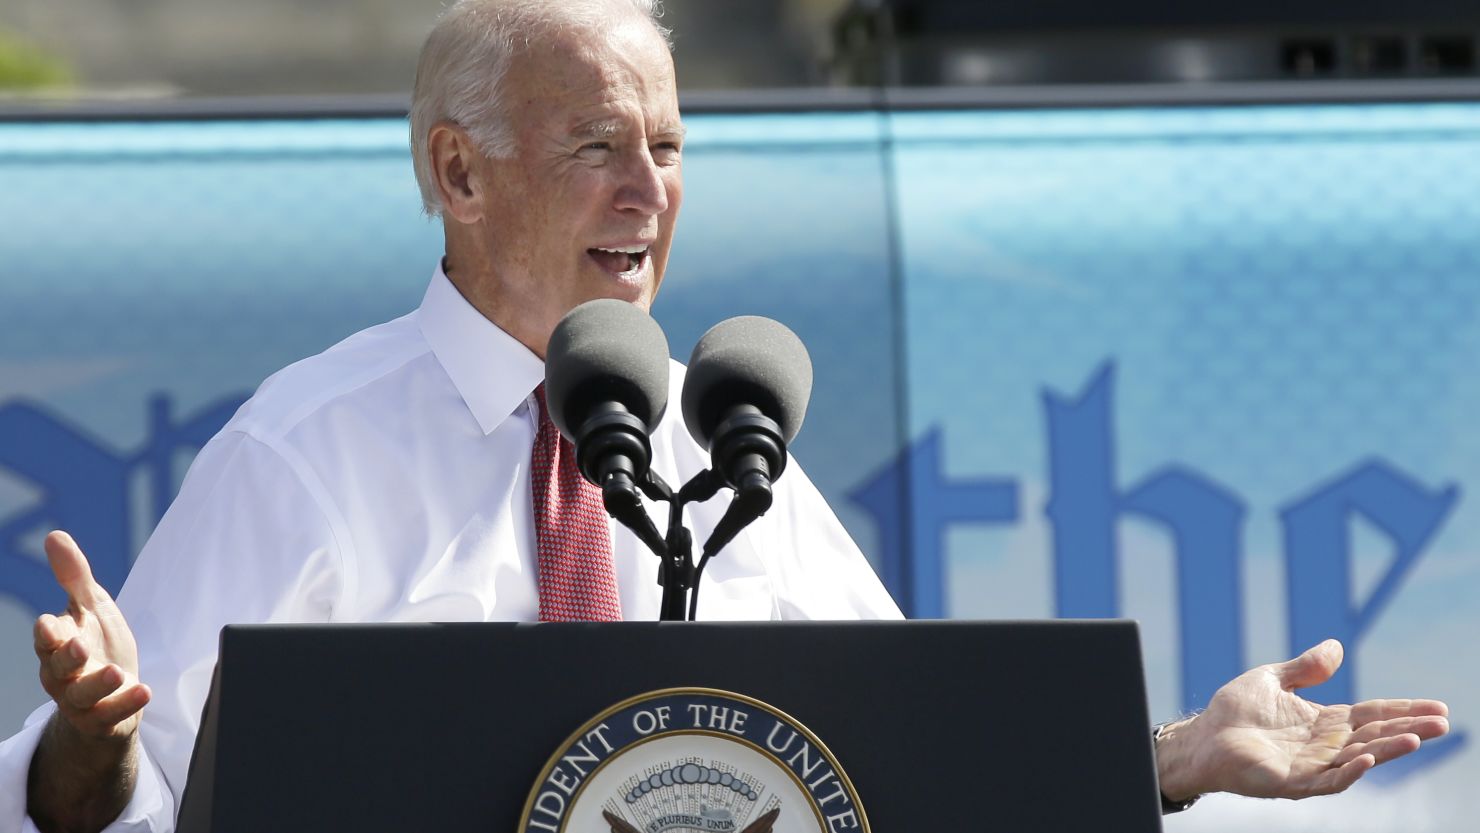 Vice President Joe Biden speaks during the kickoff of the Nuns on the Bus tour Wednesday in Des Moines, Iowa.